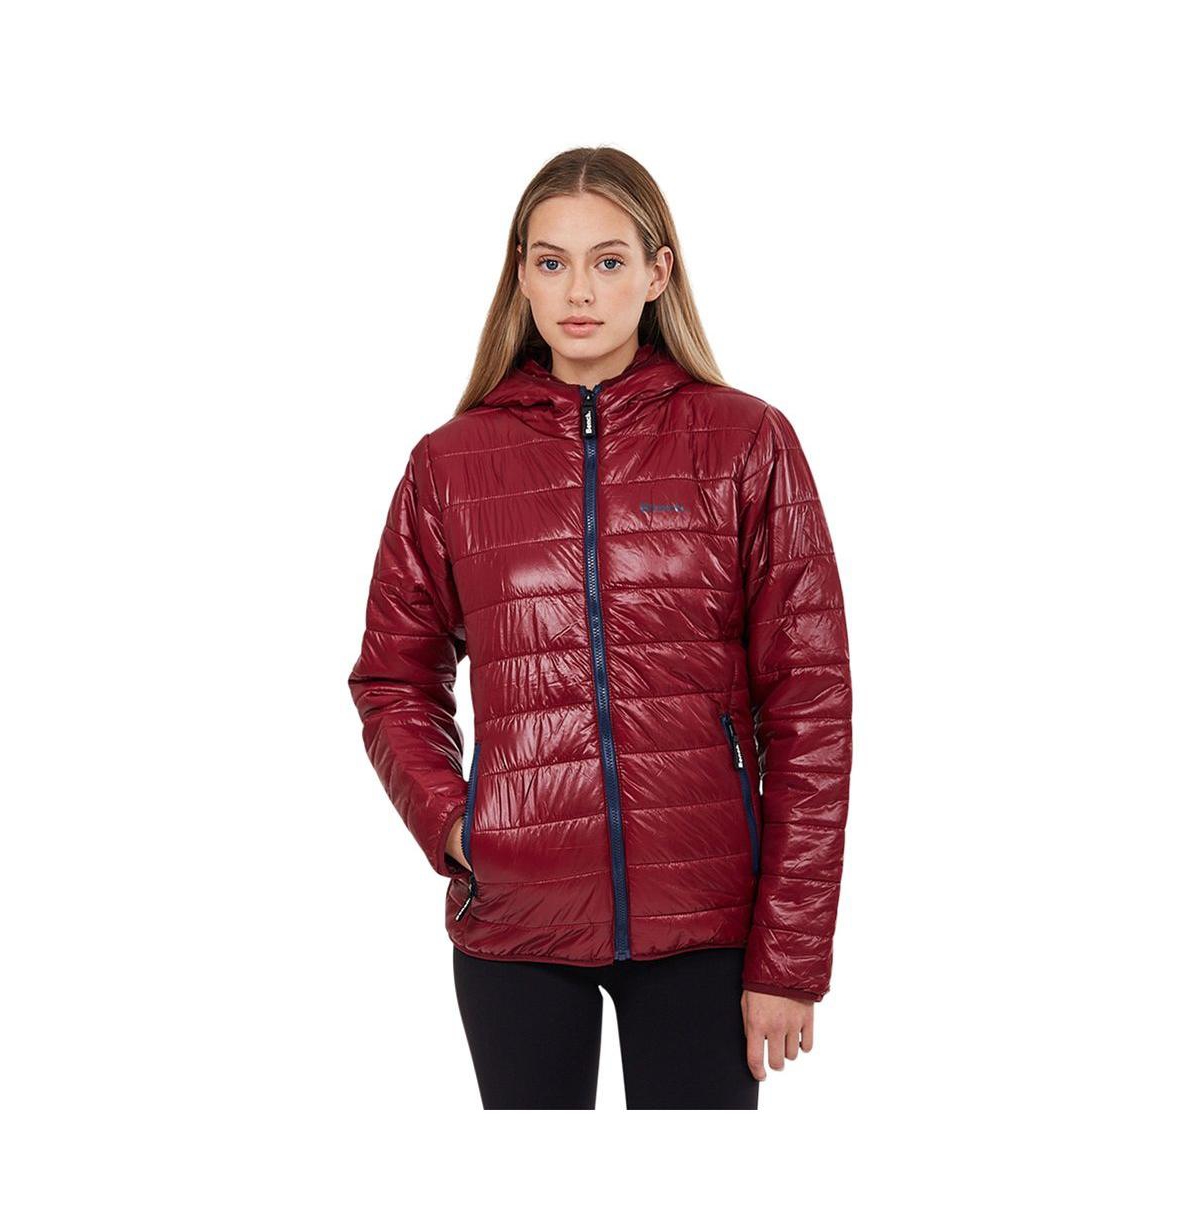 BENCH KARA WOMENS JACKET QUILTED BURGUNDY WITH NAVY ZIPPER